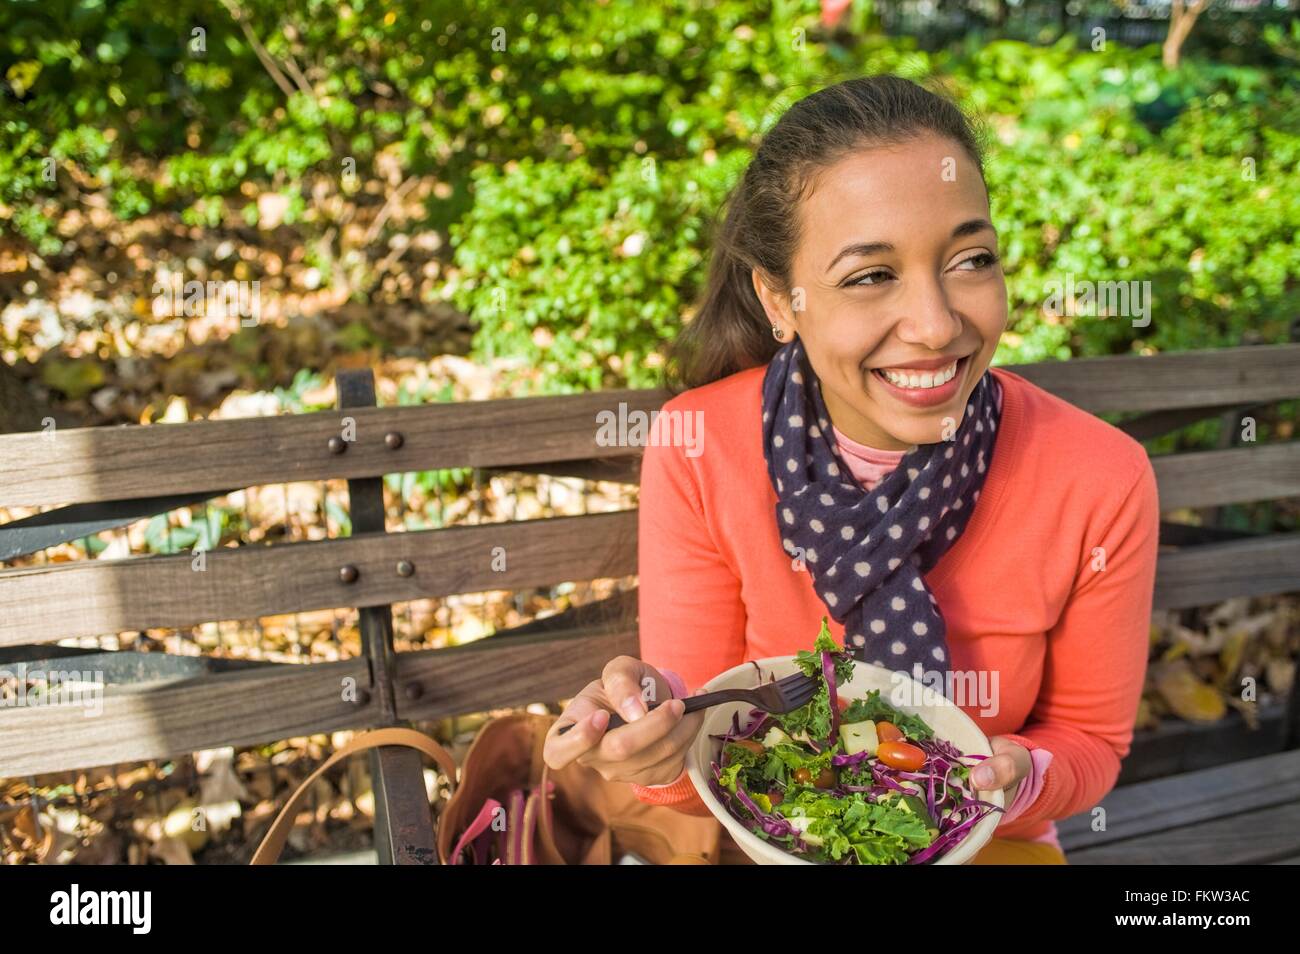 Young woman sitting on park bench eating lunch Stock Photo